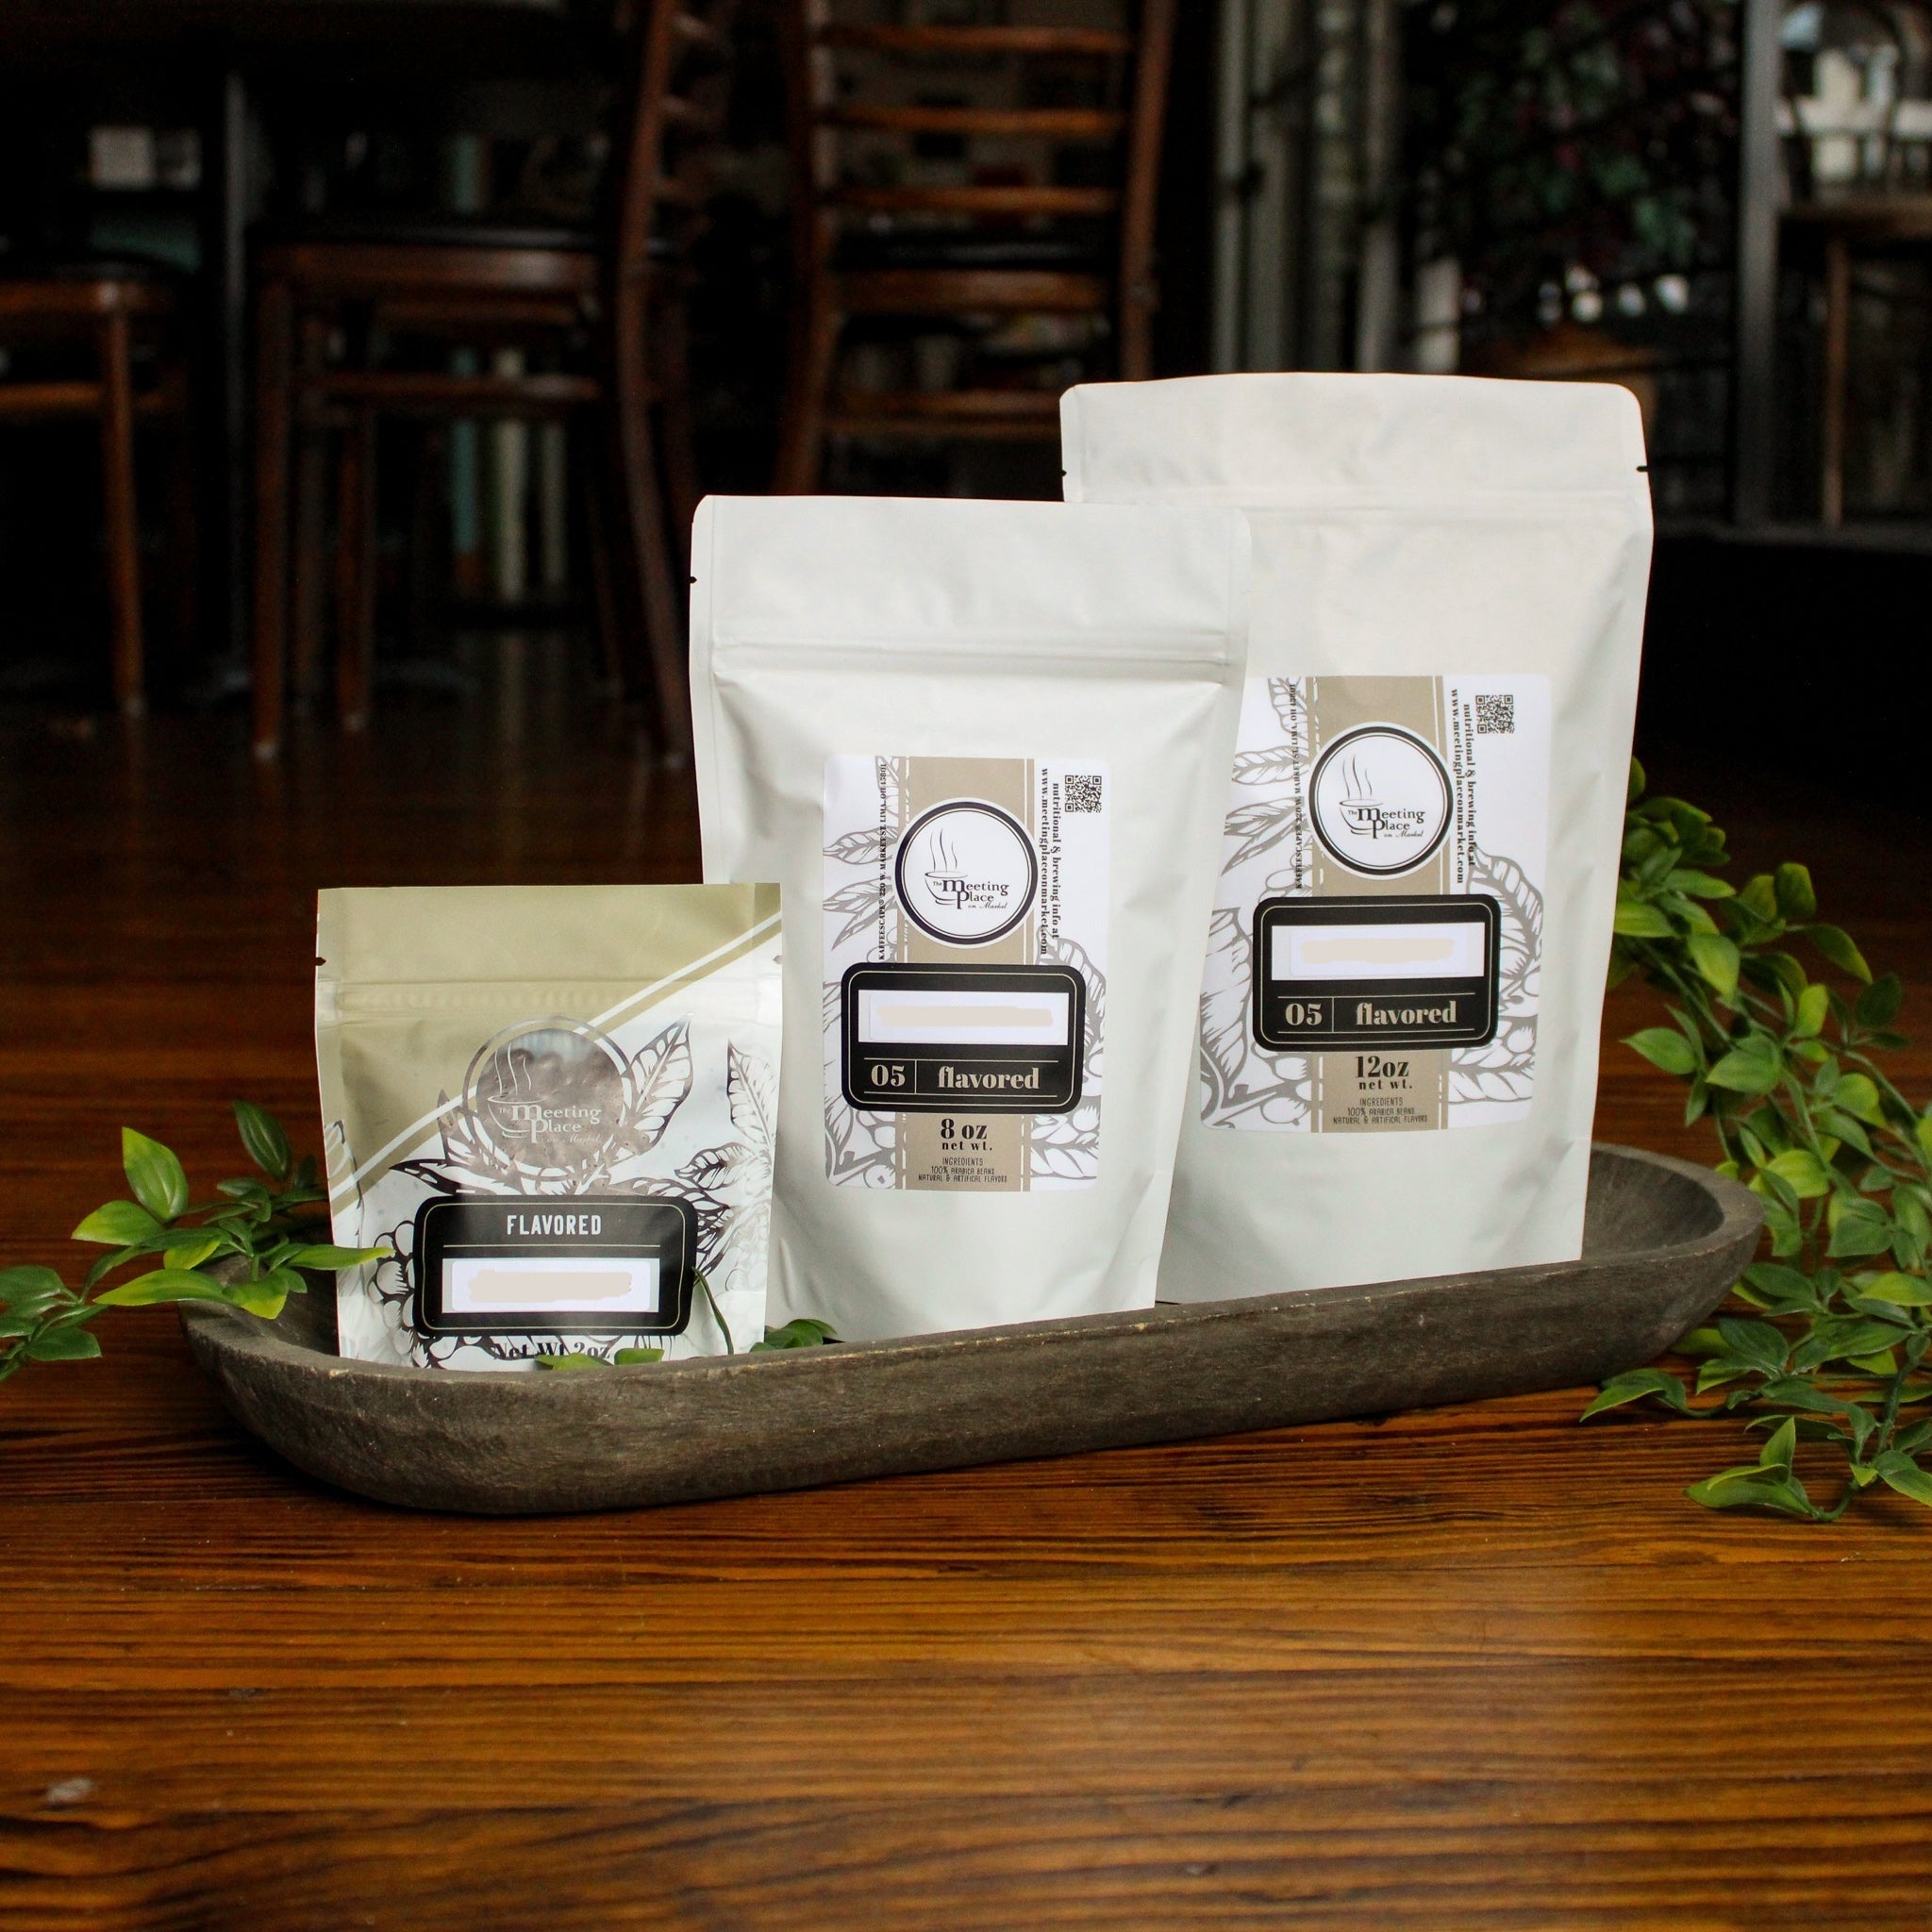 DECAF Vanilla Caramel Coffee Beans / Ground Coffee Gourmet Coffee - The Meeting Place on Market